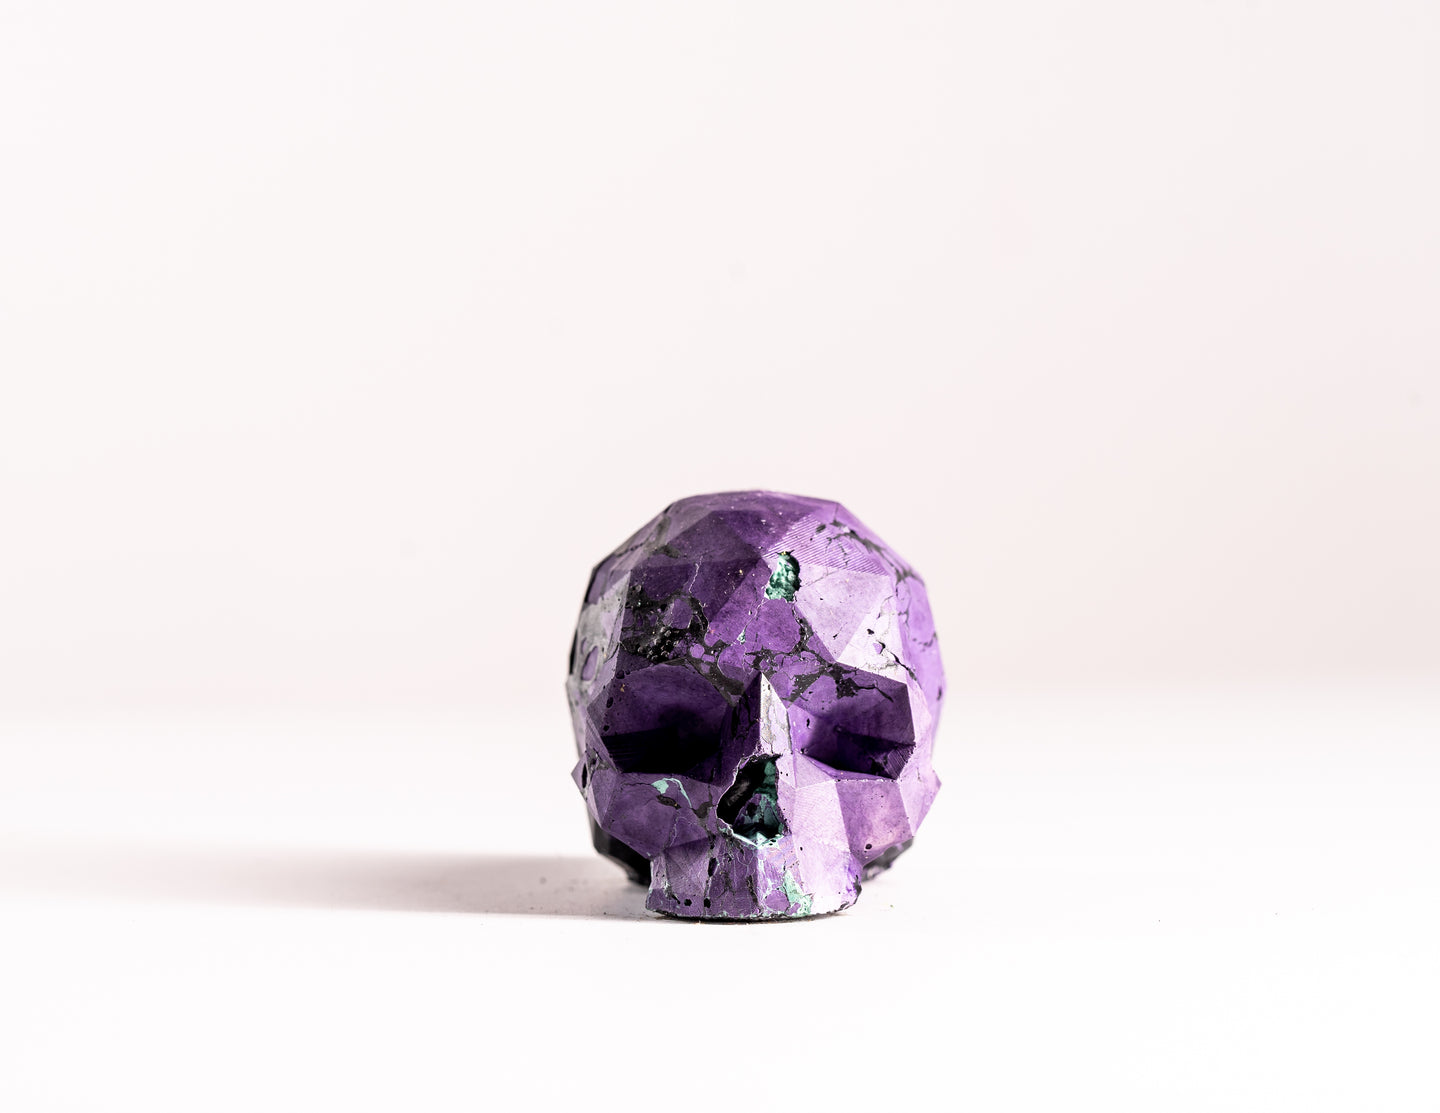 Mini Collectible Skull - Marbled - 131